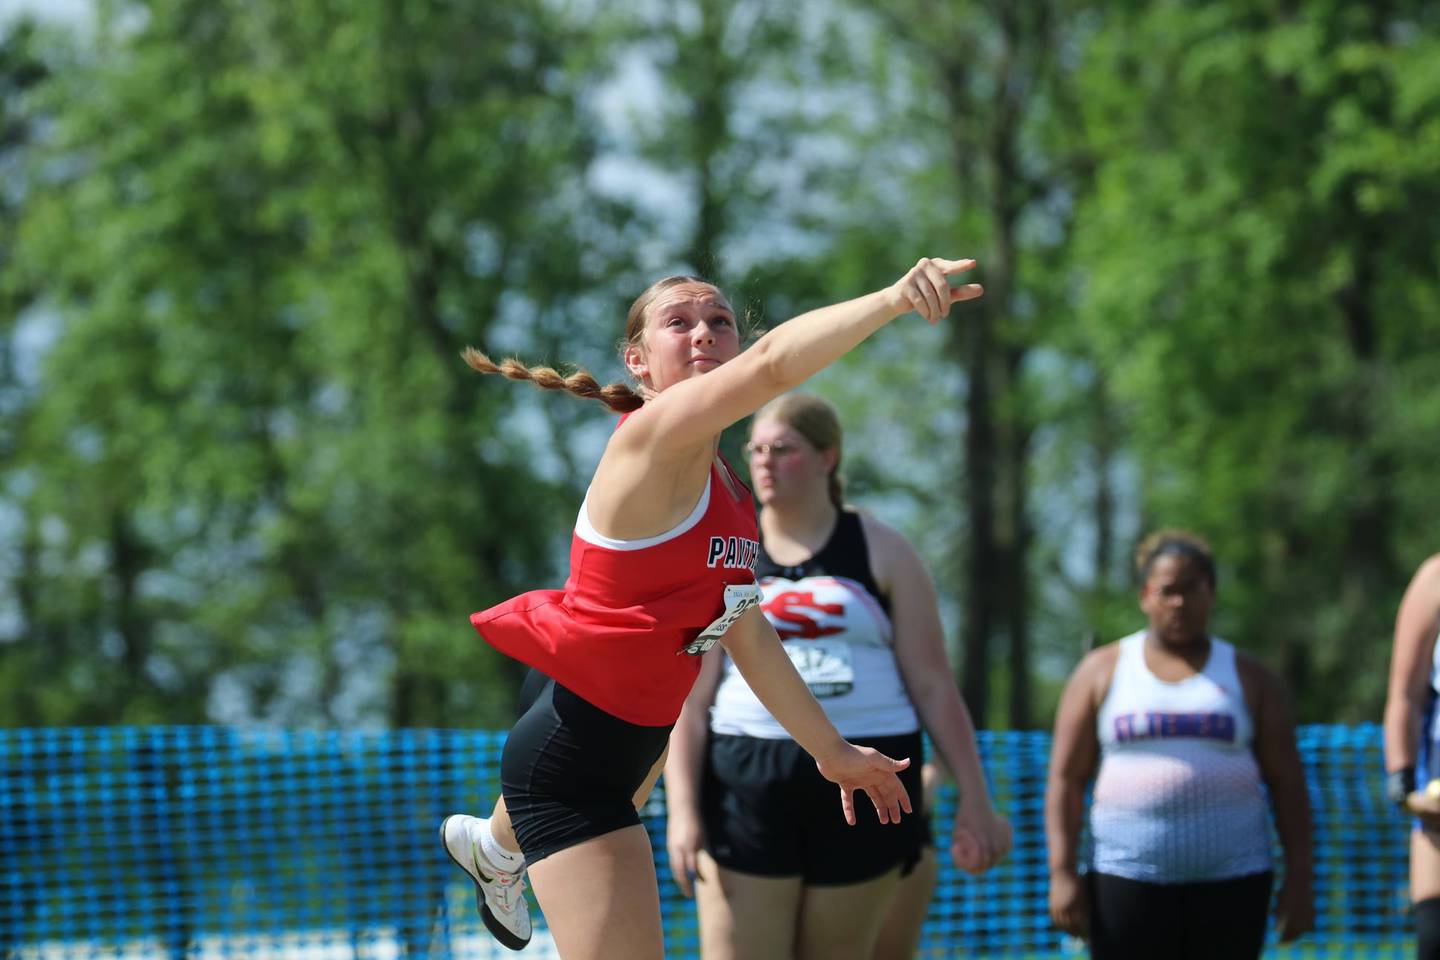 Eric-Prophetstown's Kennedy Buck throws 11.93 meters to take second place in the Class 1A shot put at the IHSA Girls Track and Field State Meet on Saturday.